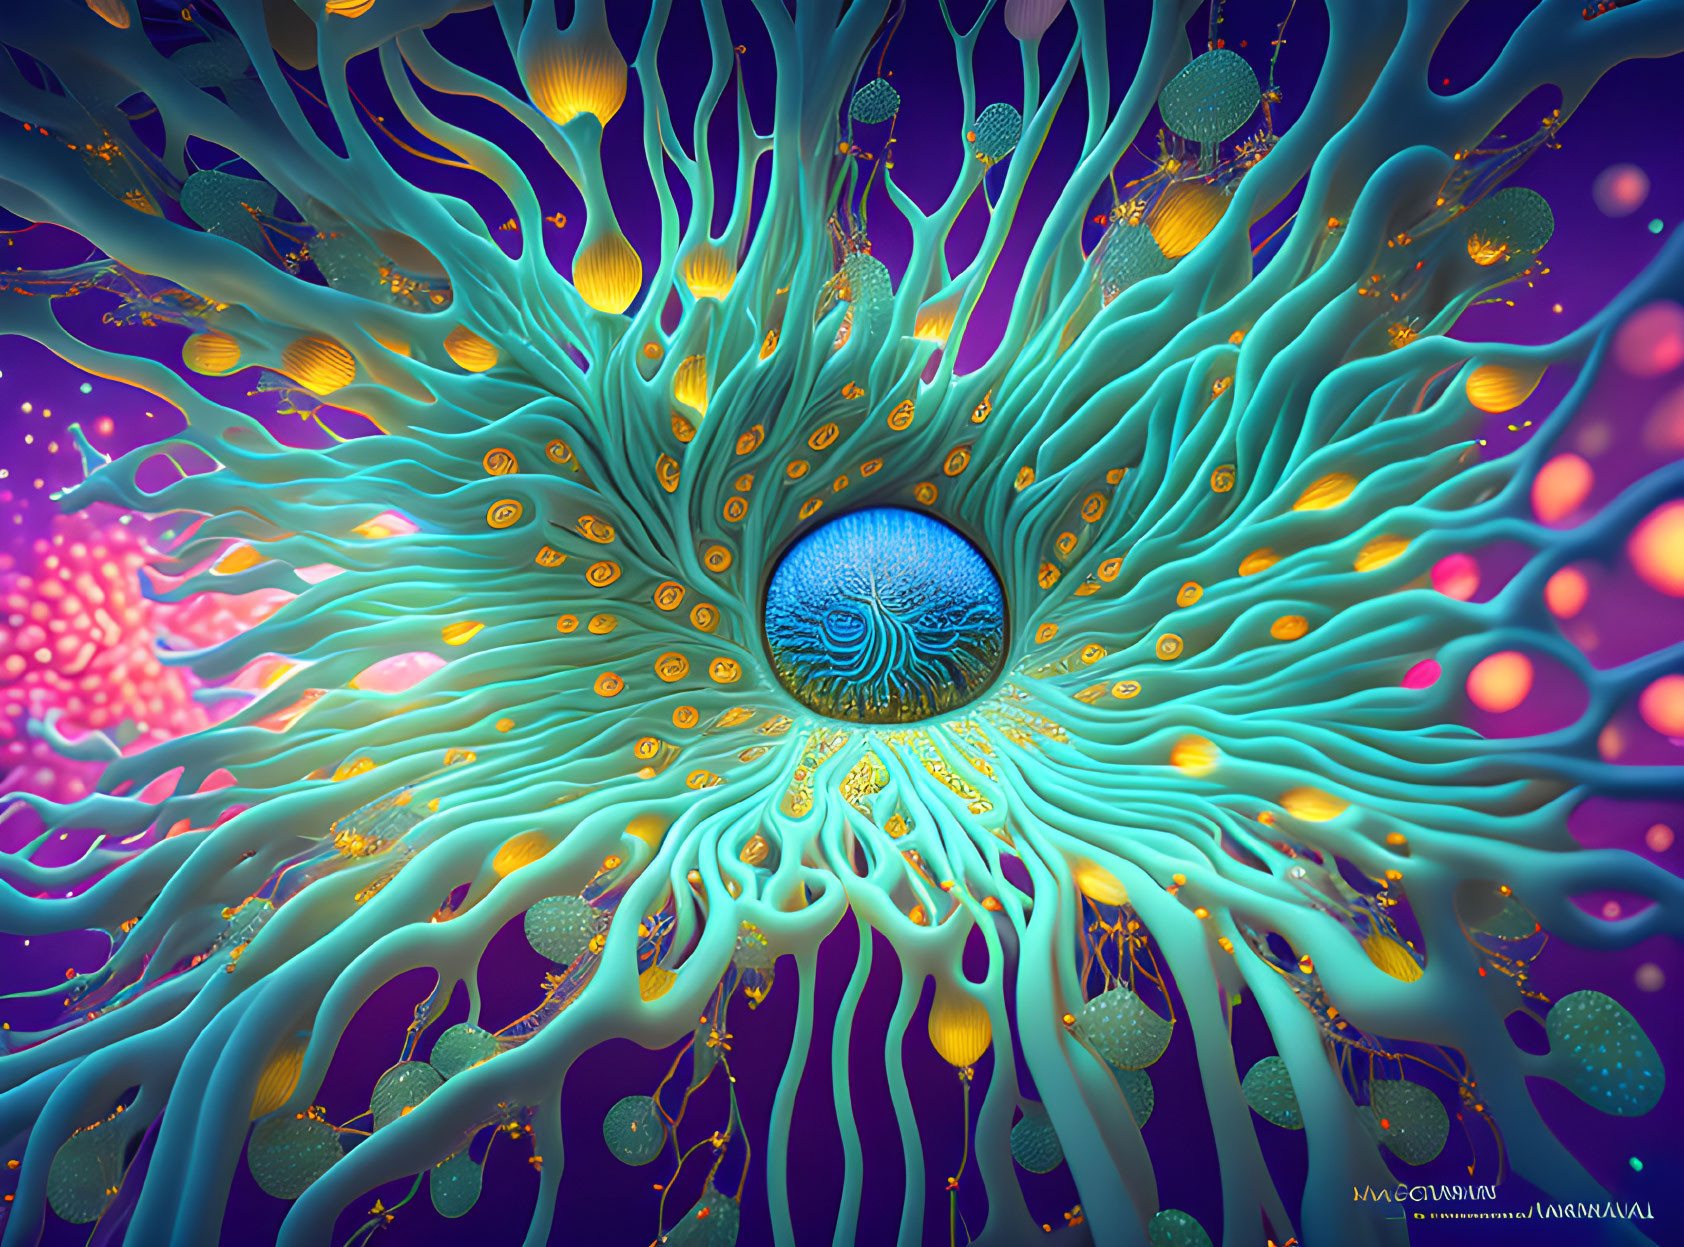 Colorful Digital Artwork with Stylized Eye and Fractal Patterns